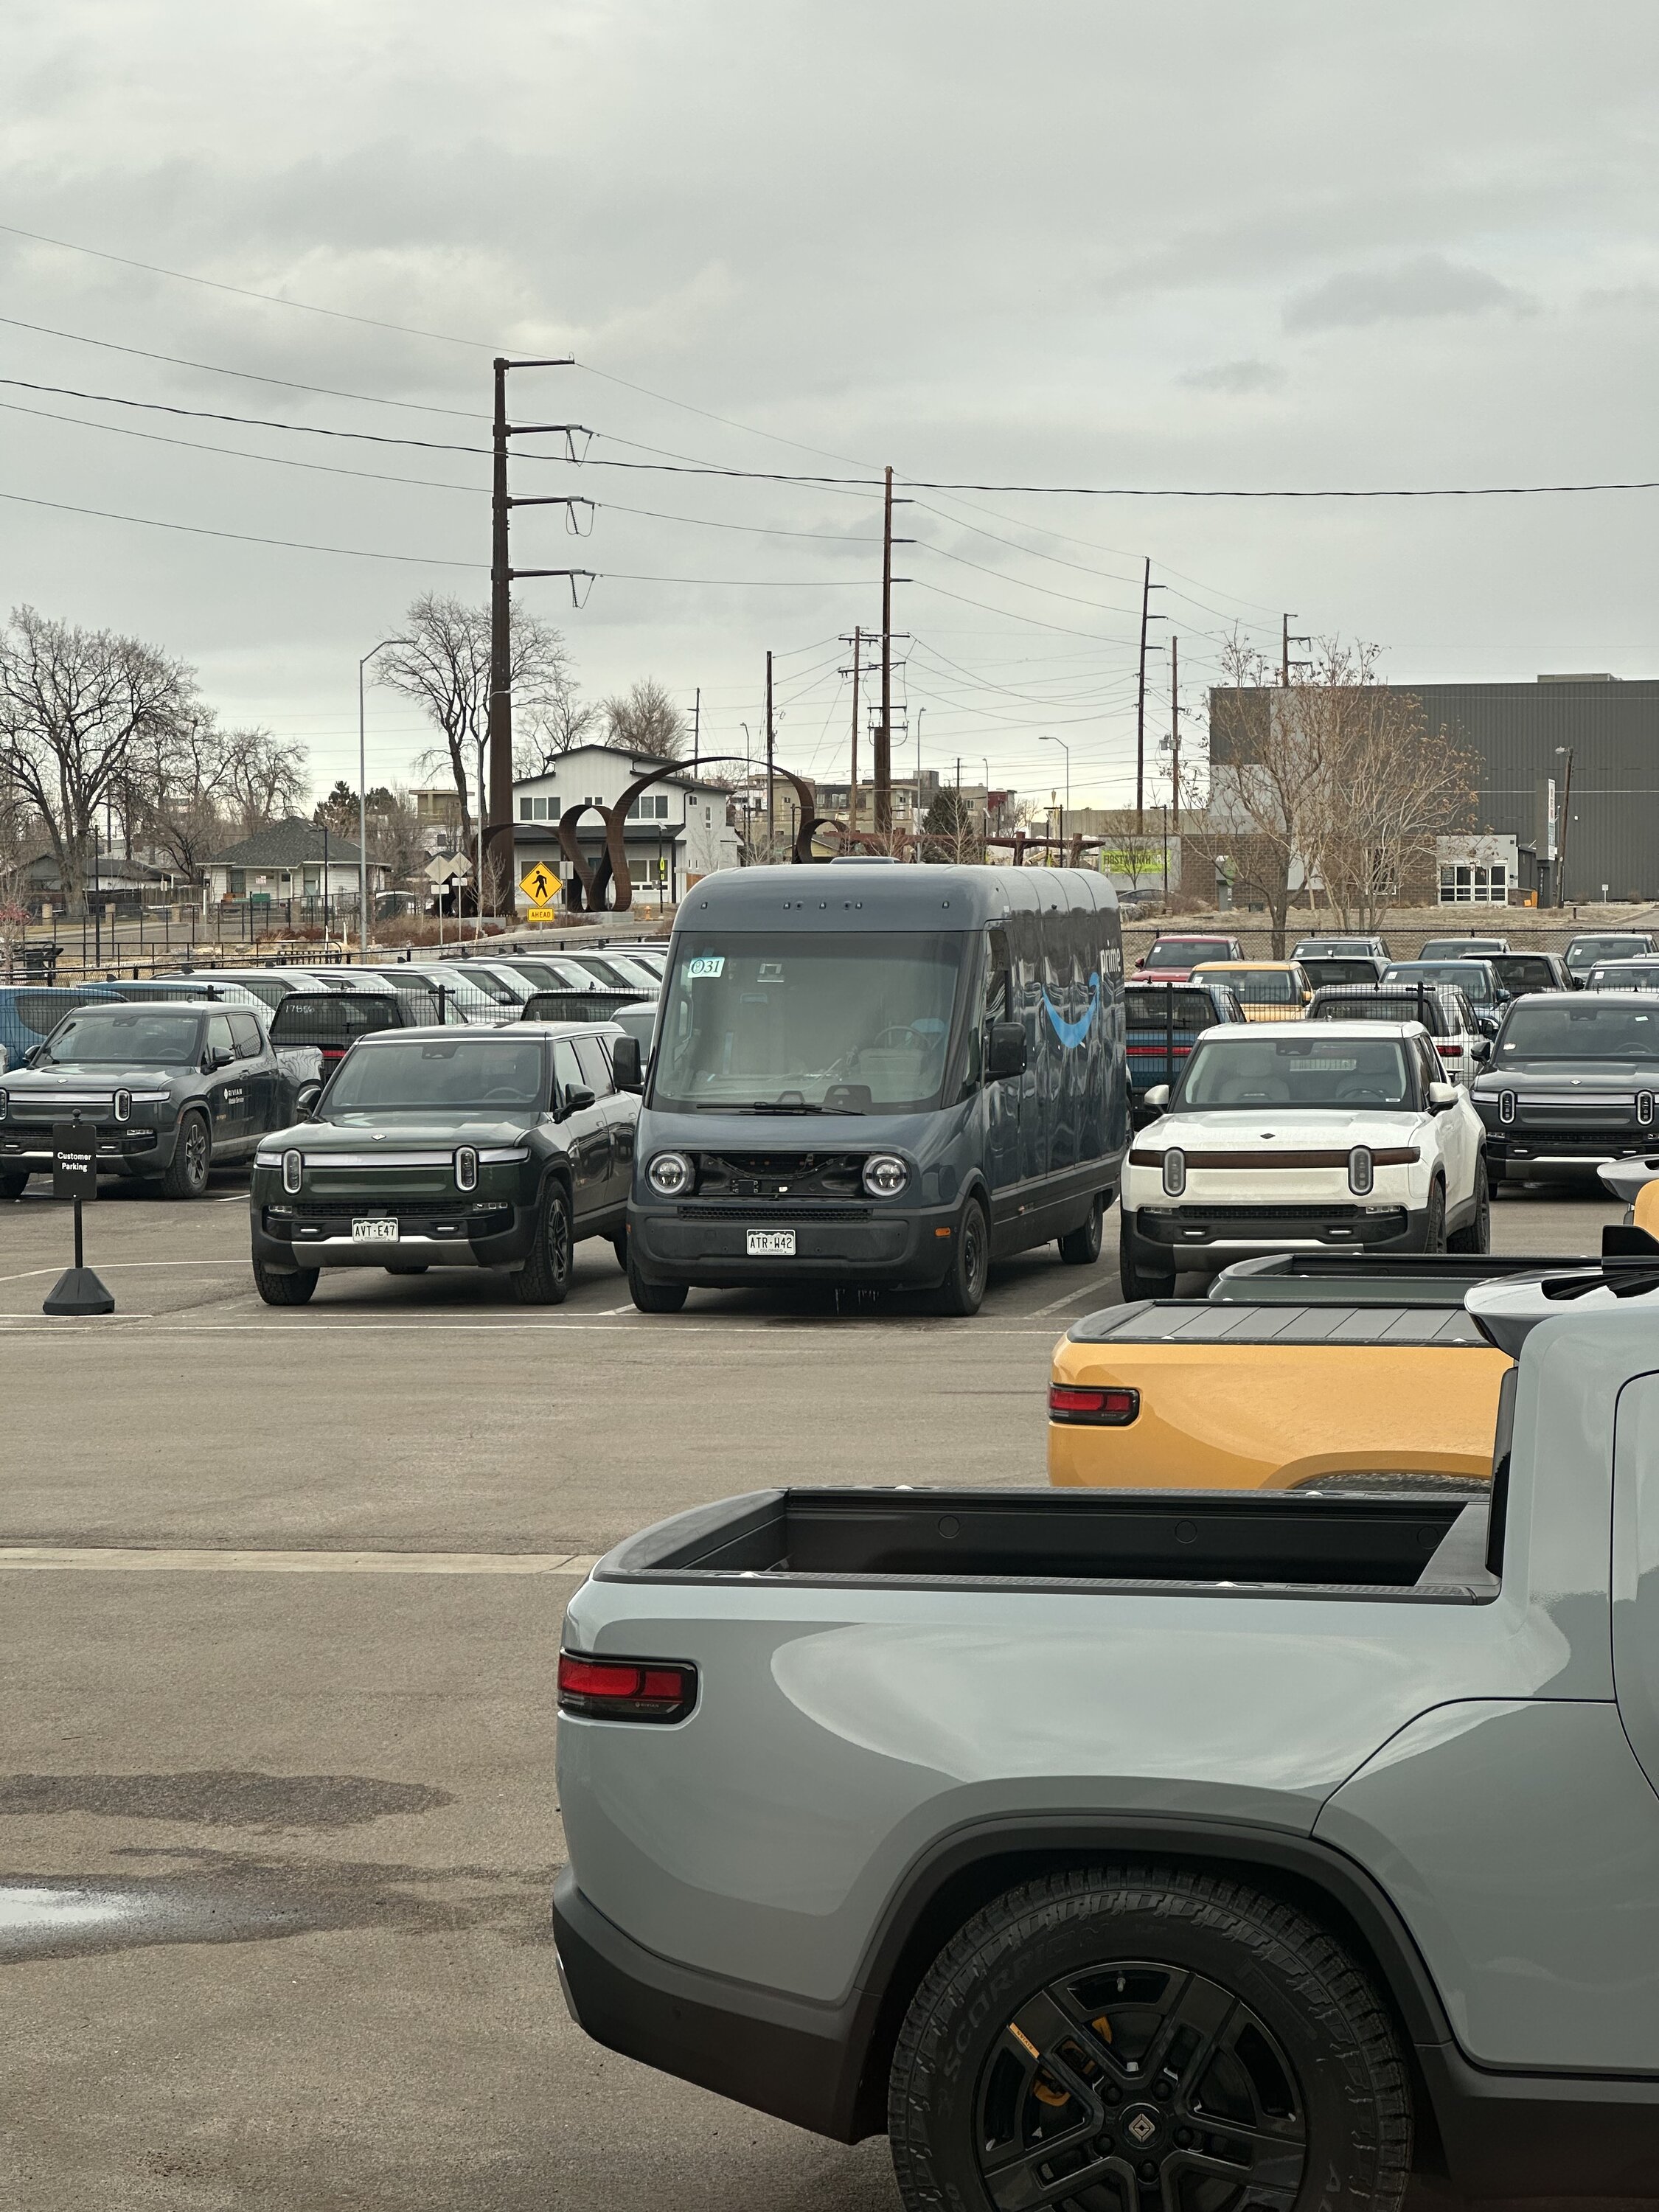 Rivian R1T R1S Rivian Dad Episode: Recall #2 | Amazon Van | Compass Yellow R1S | White/White R1S | 120+ Rivians in the Denver Lot 9C416039-EB60-4D6A-A450-D2B1B80F8DED